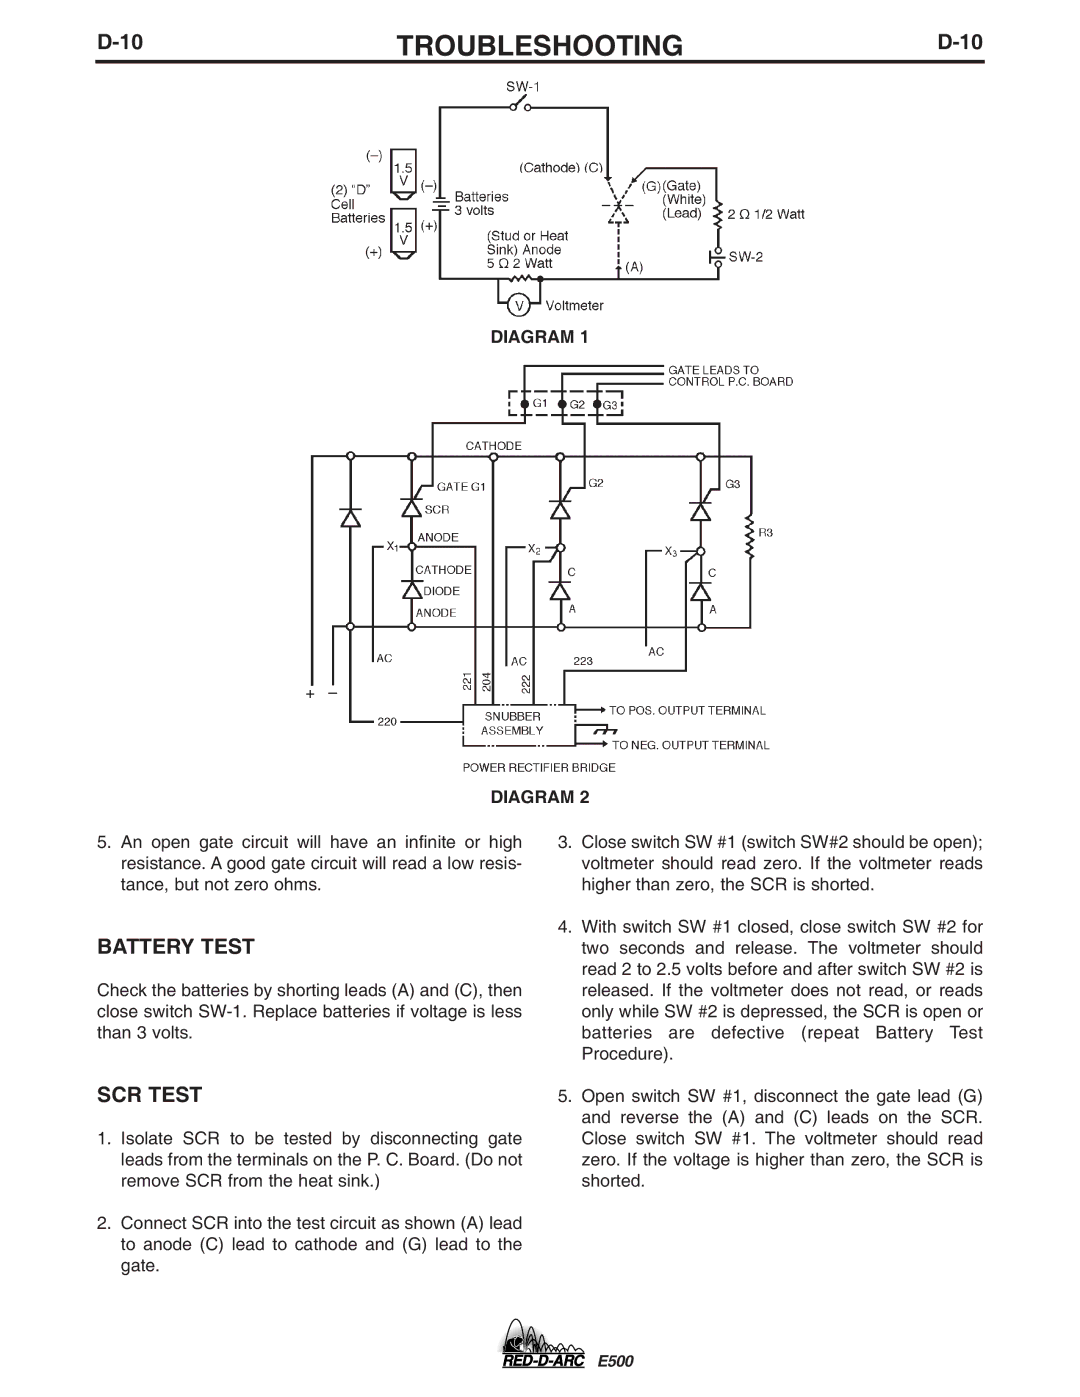 Lincoln Electric E500 specifications Battery Test, SCR Test, Diagram 